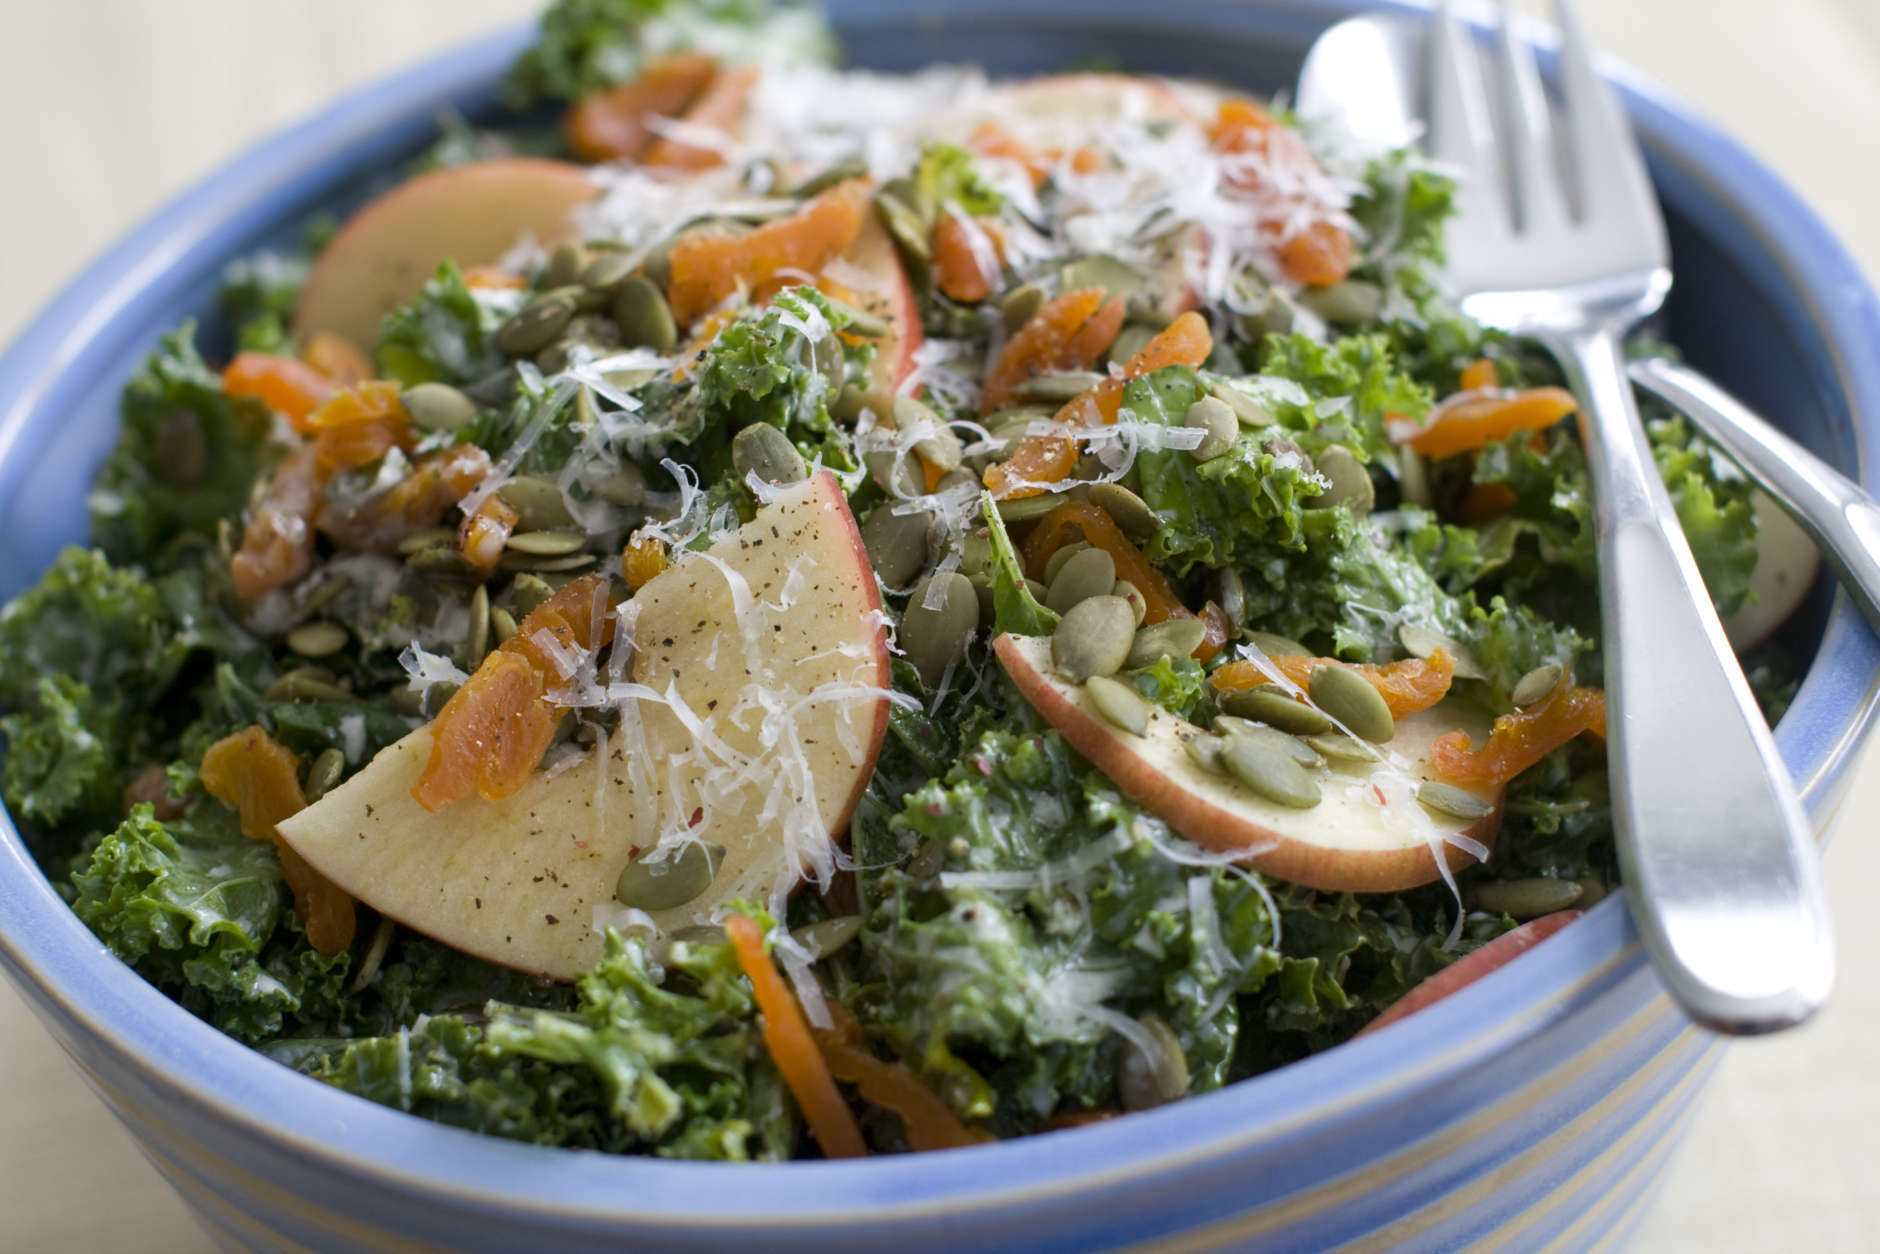 This March 10, 2014 photo shows kale salad with apples apricots and manchego cheese in Concord, N.H. (AP Photo/Matthew Mead)